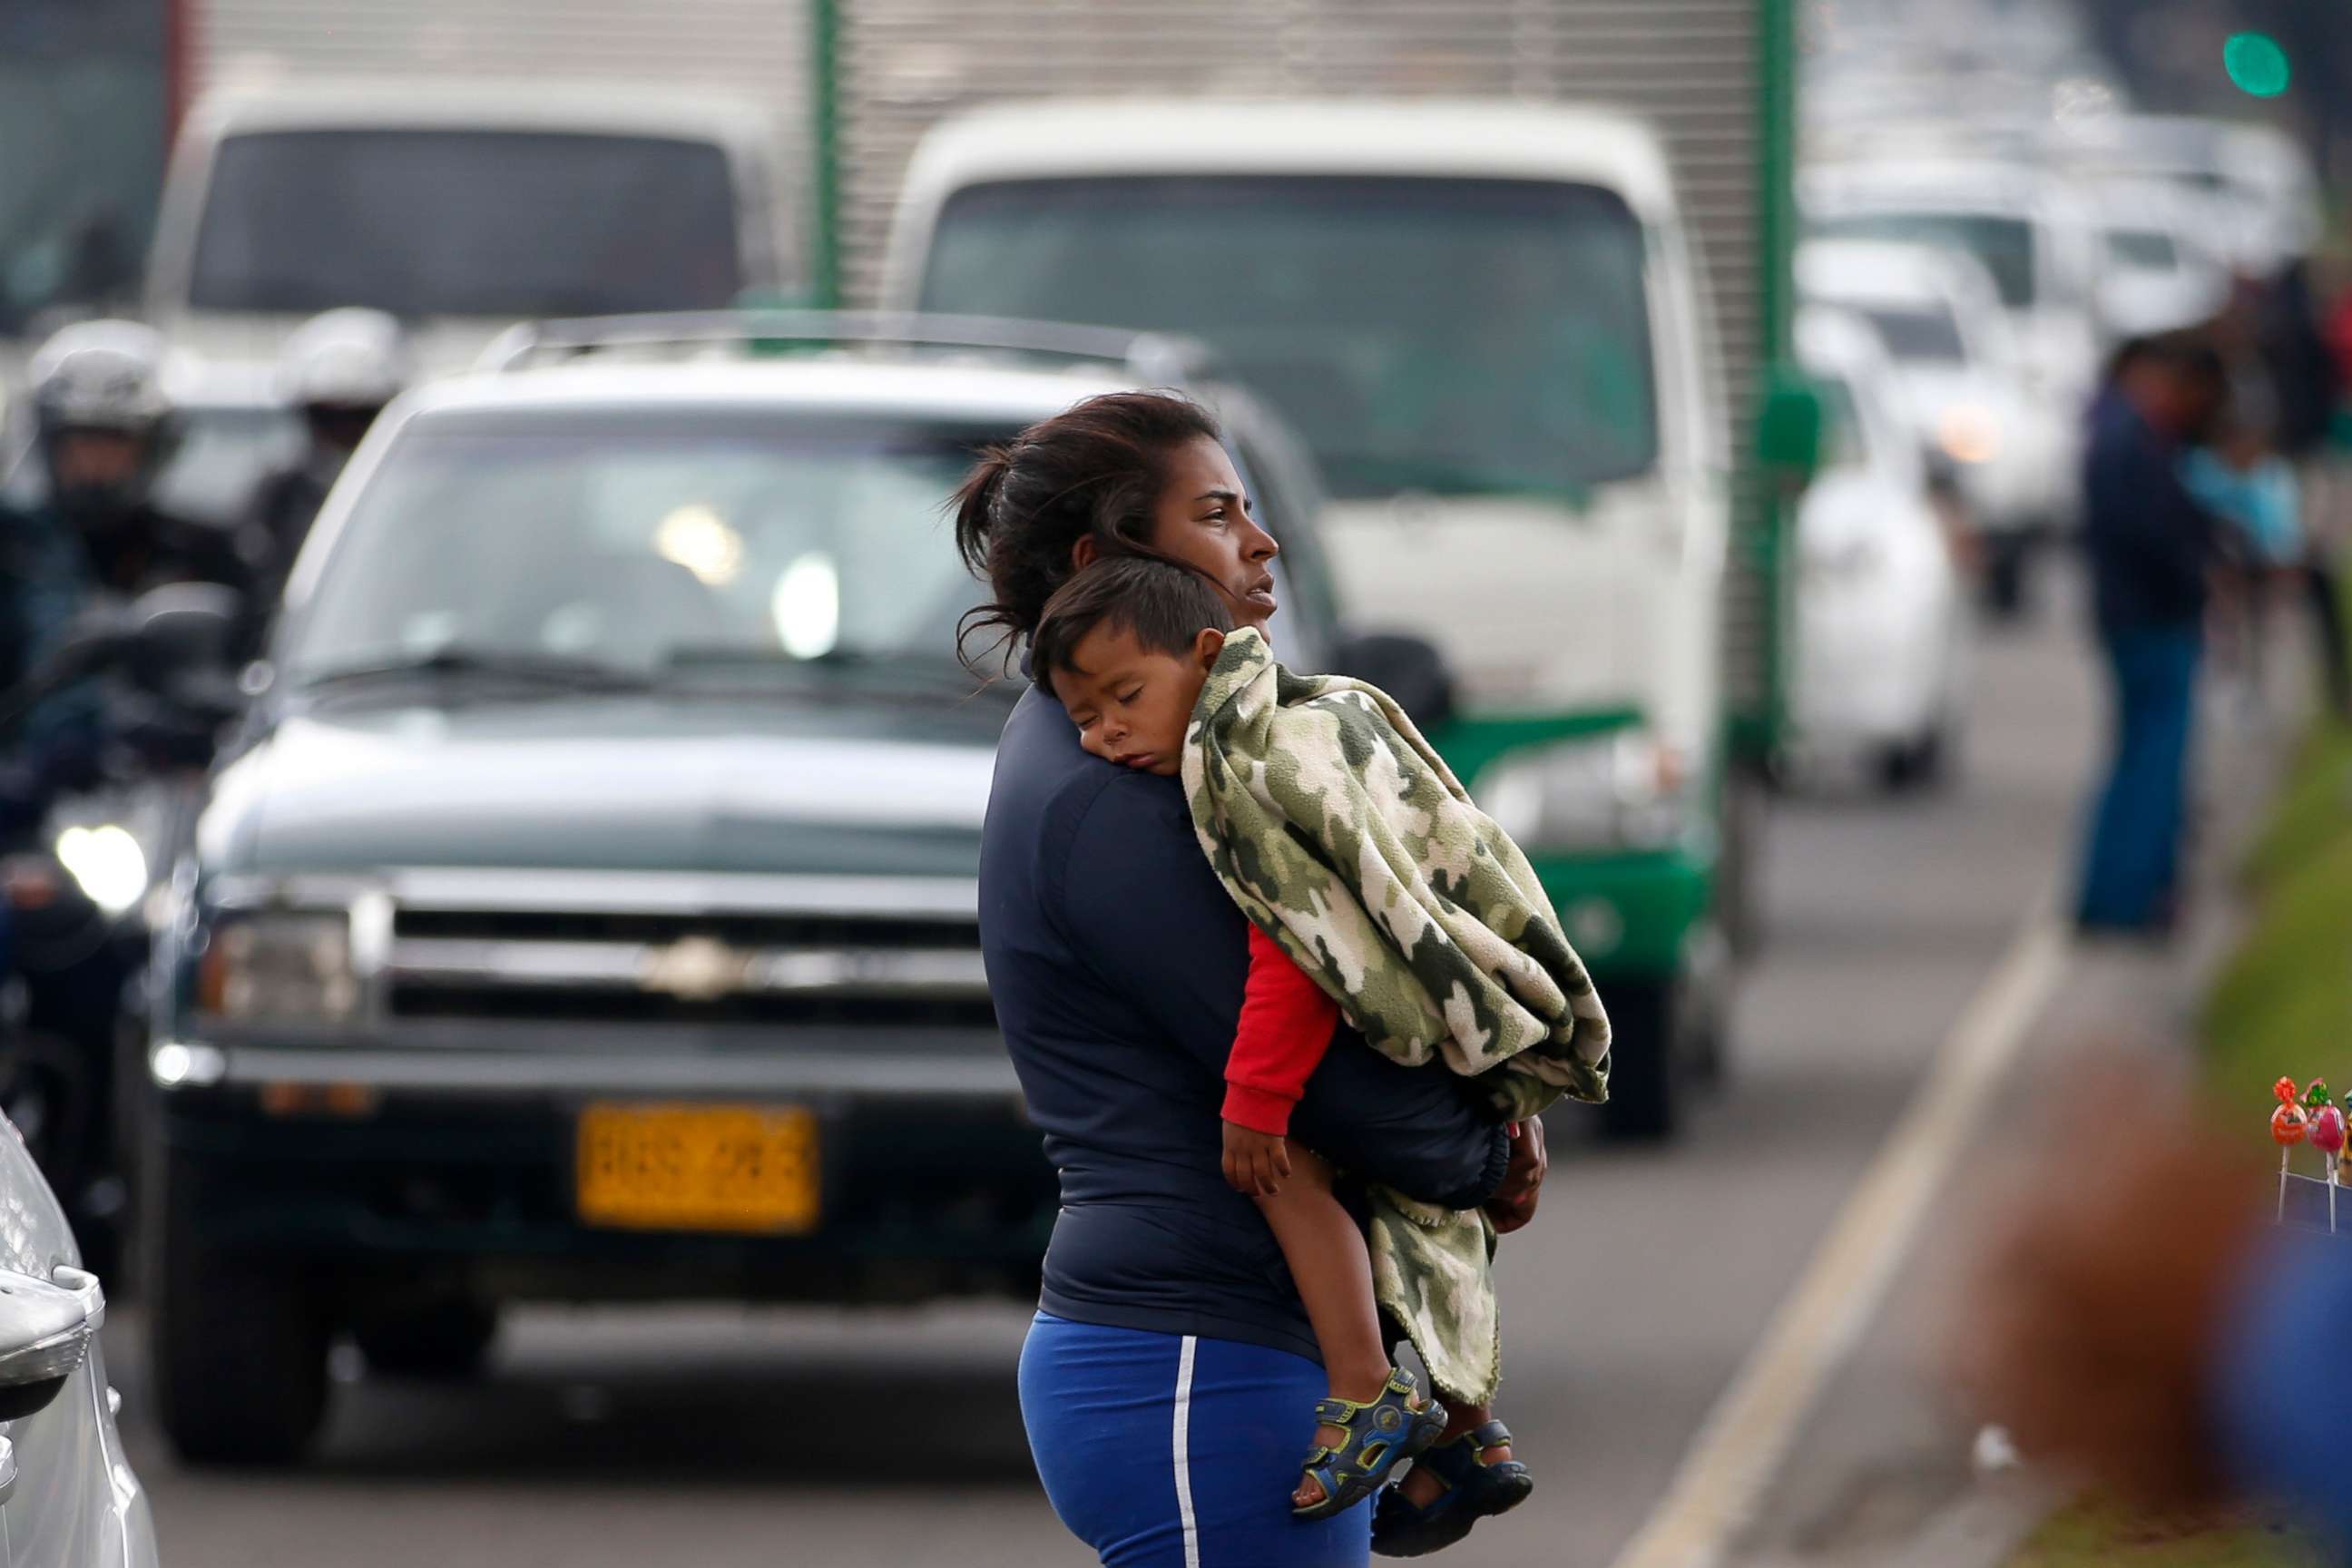 PHOTO: A Venezuelan migrant waits for traffic to come to a standstill so that she can ask drivers for spare change, in Bogota, April 4, 2019.